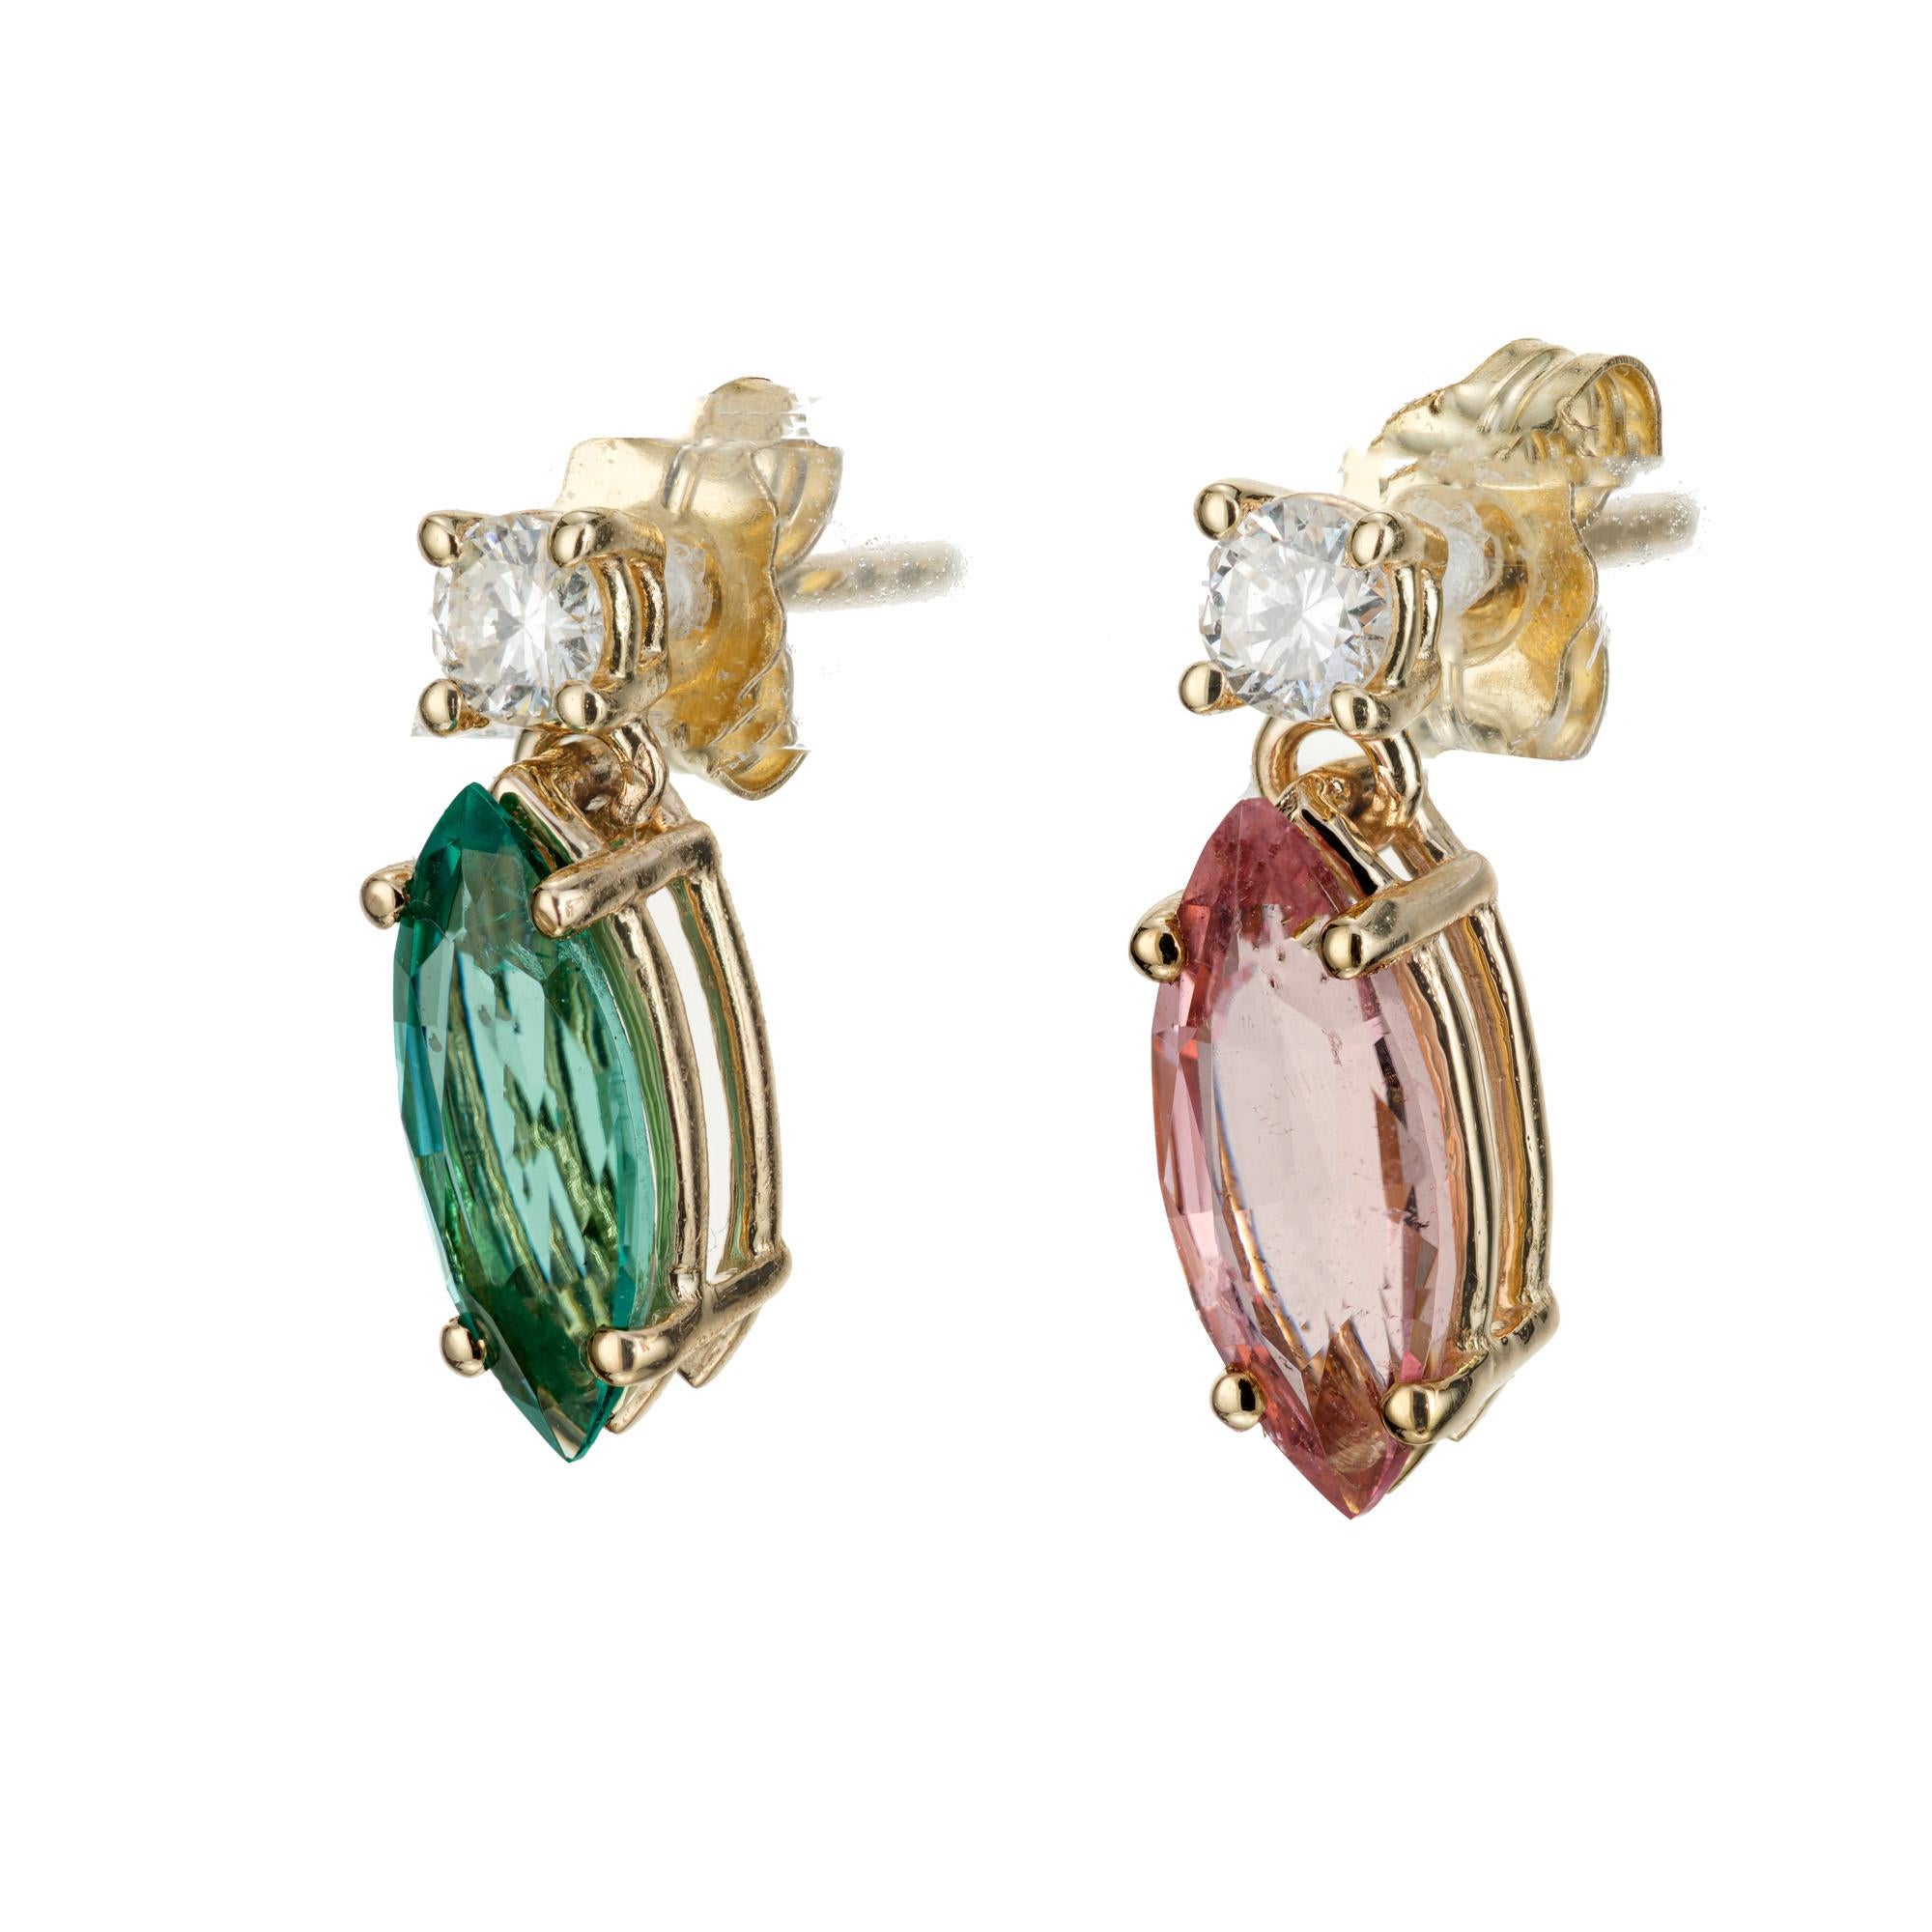 One of a kind dangle earrings with pink and green marquise tourmaline with diamonds tops.  Designed and crafted in the Peter Suchy workshop.

1 marquise cut pink tourmaline
1 marquise cut bluish green tourmaline 
Tourmaline total carat weight,